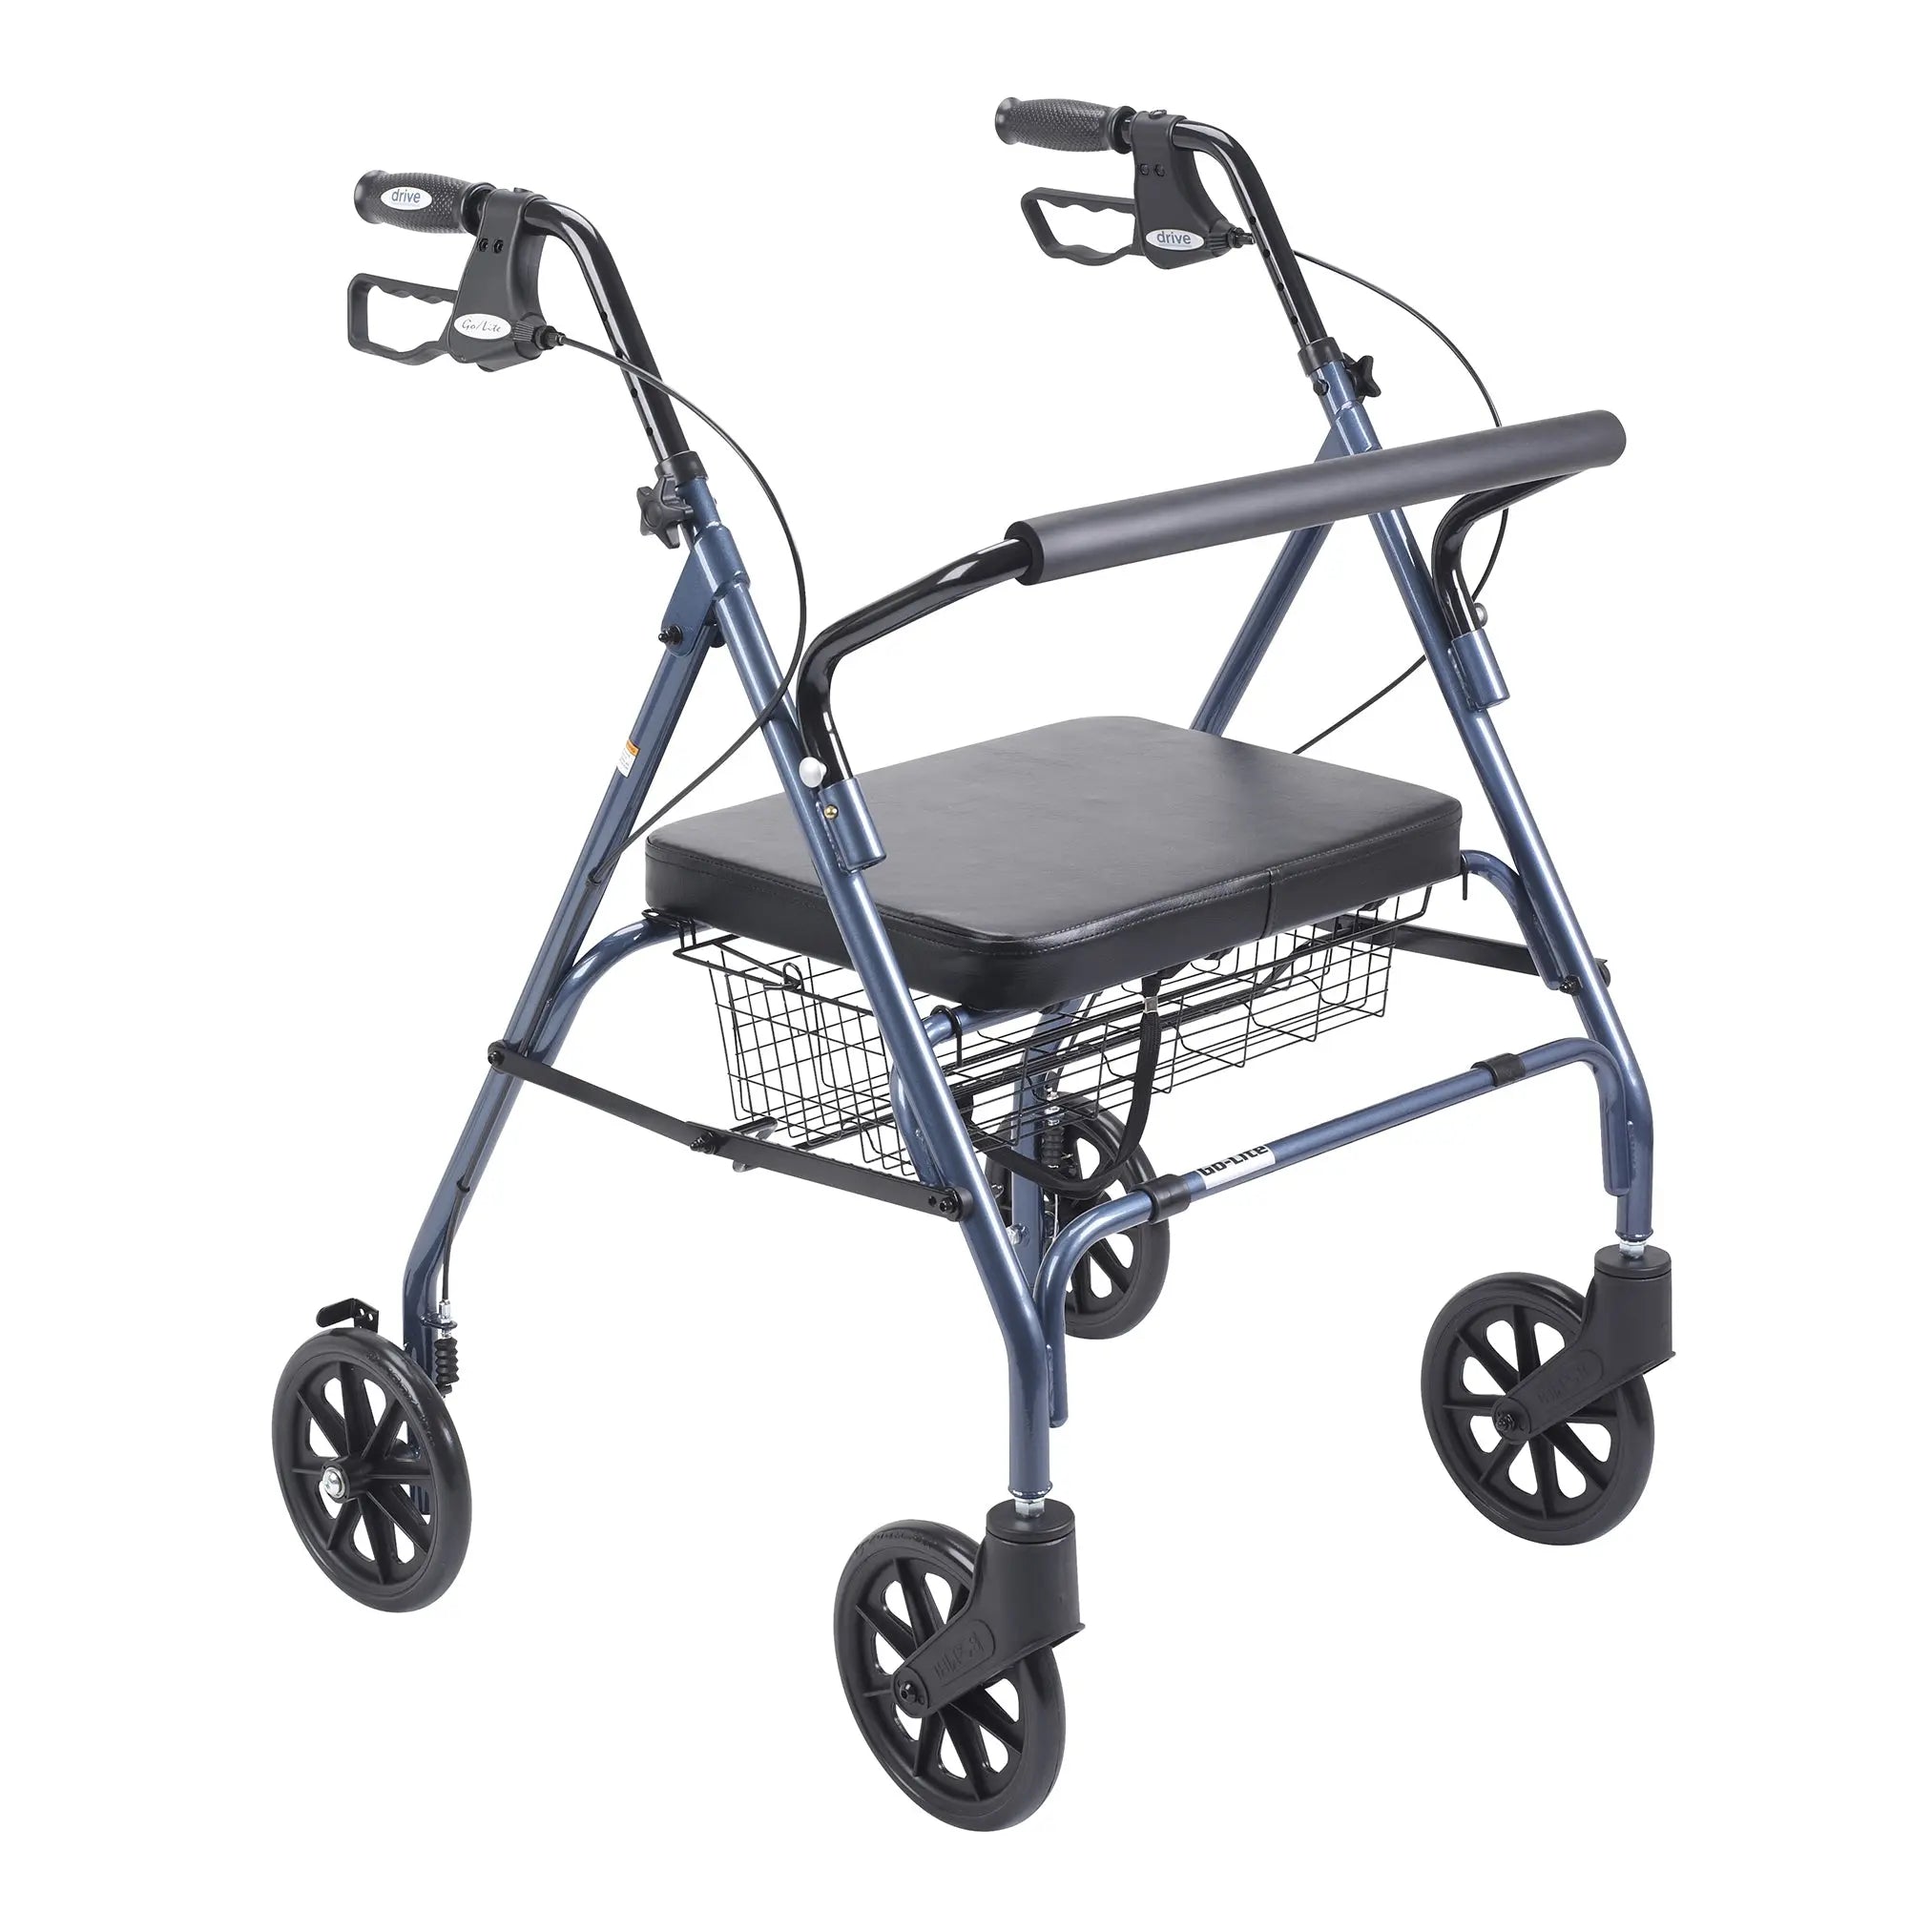 Heavy Duty Bariatric Rollator Rolling Walker with Large Padded Seat